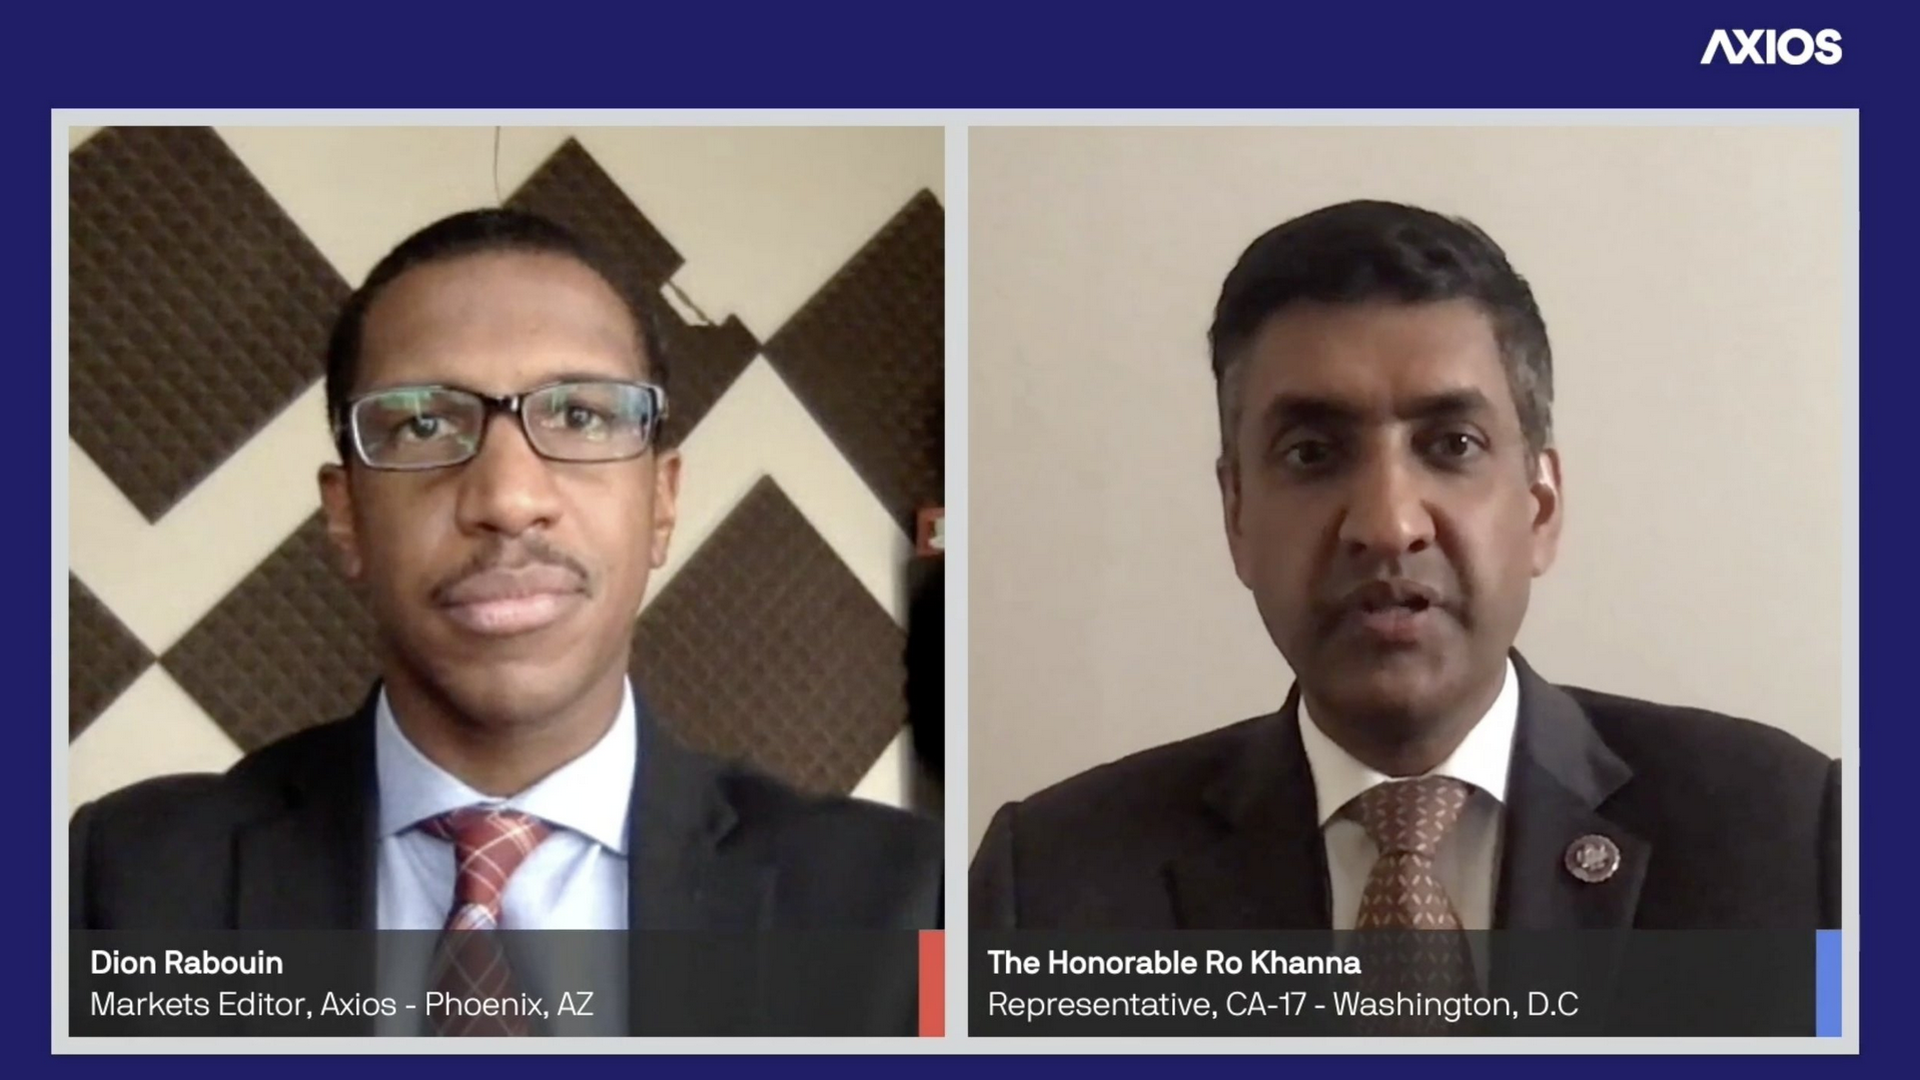 Screenshot of an Axios virtual event, Axios' Dion Rabouin is on the left screen and Rep. Ro Khanna is on the right screen